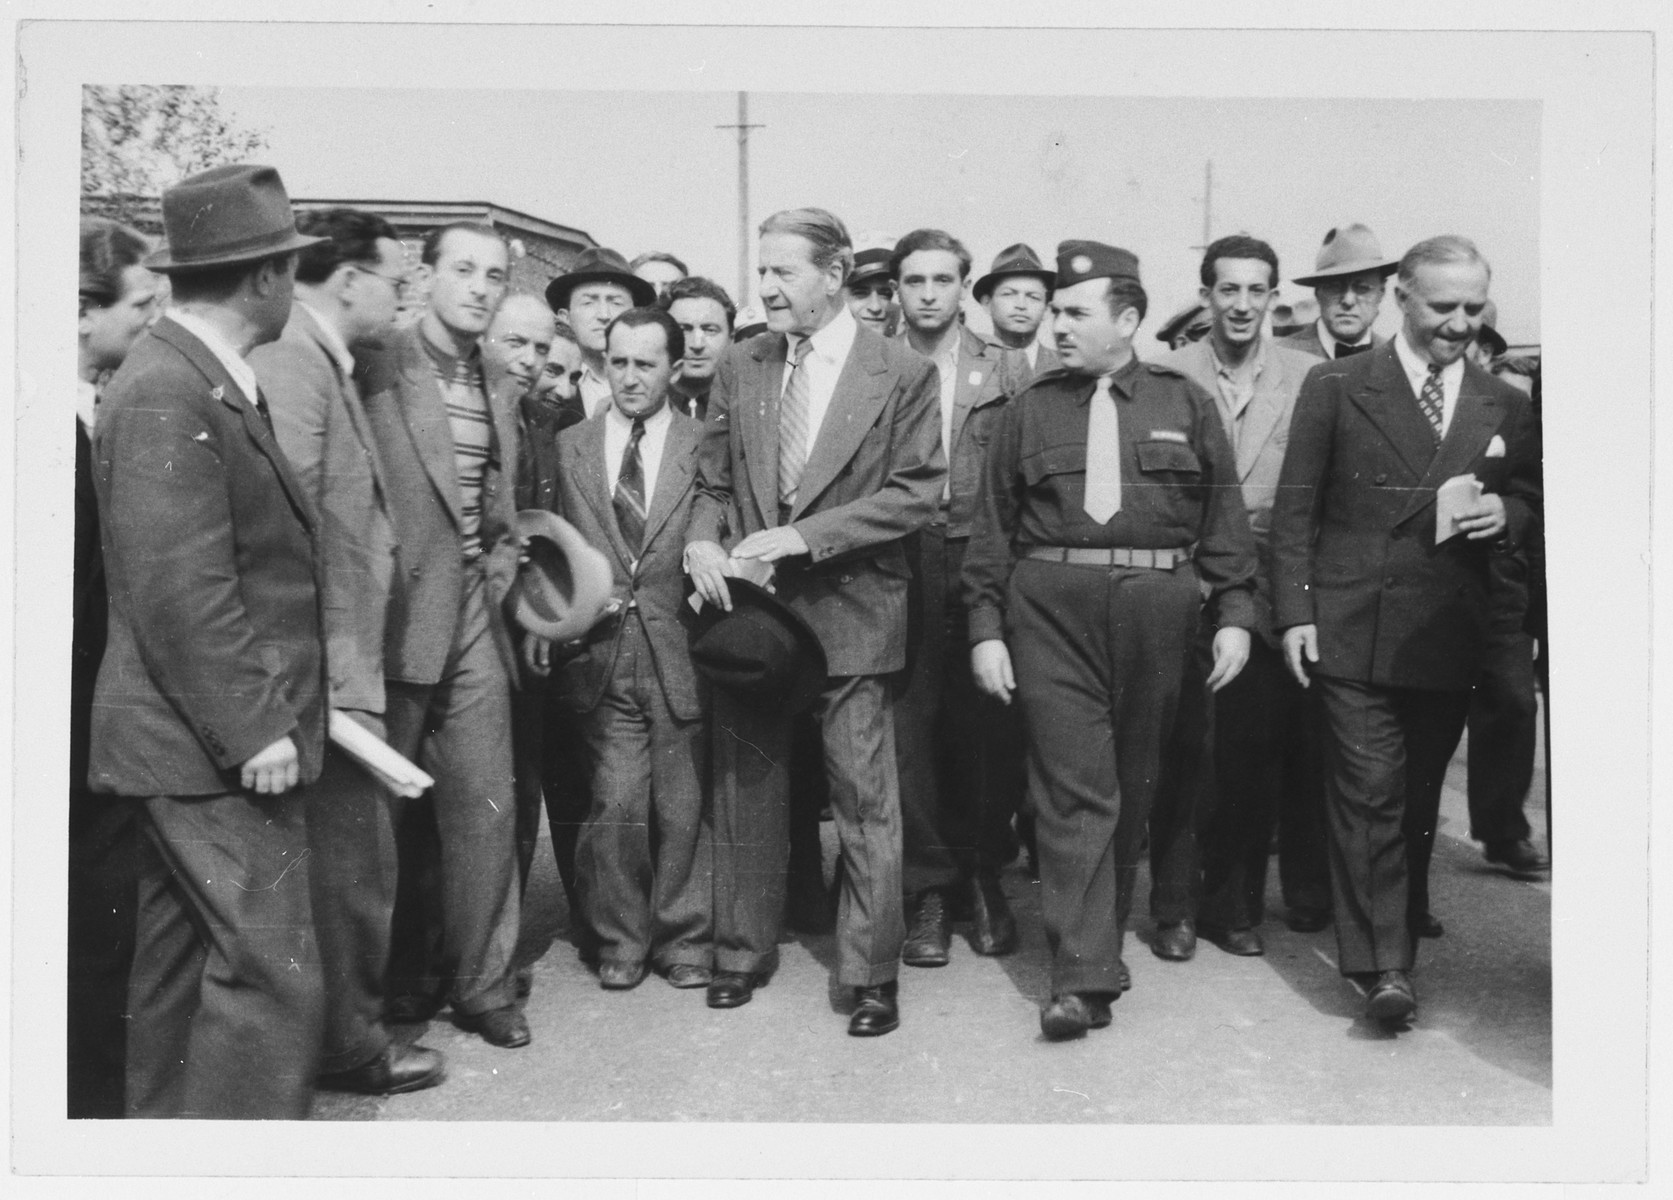 Rabbi Stephen Wise visits the Zeilsheim displaced persons' camp.